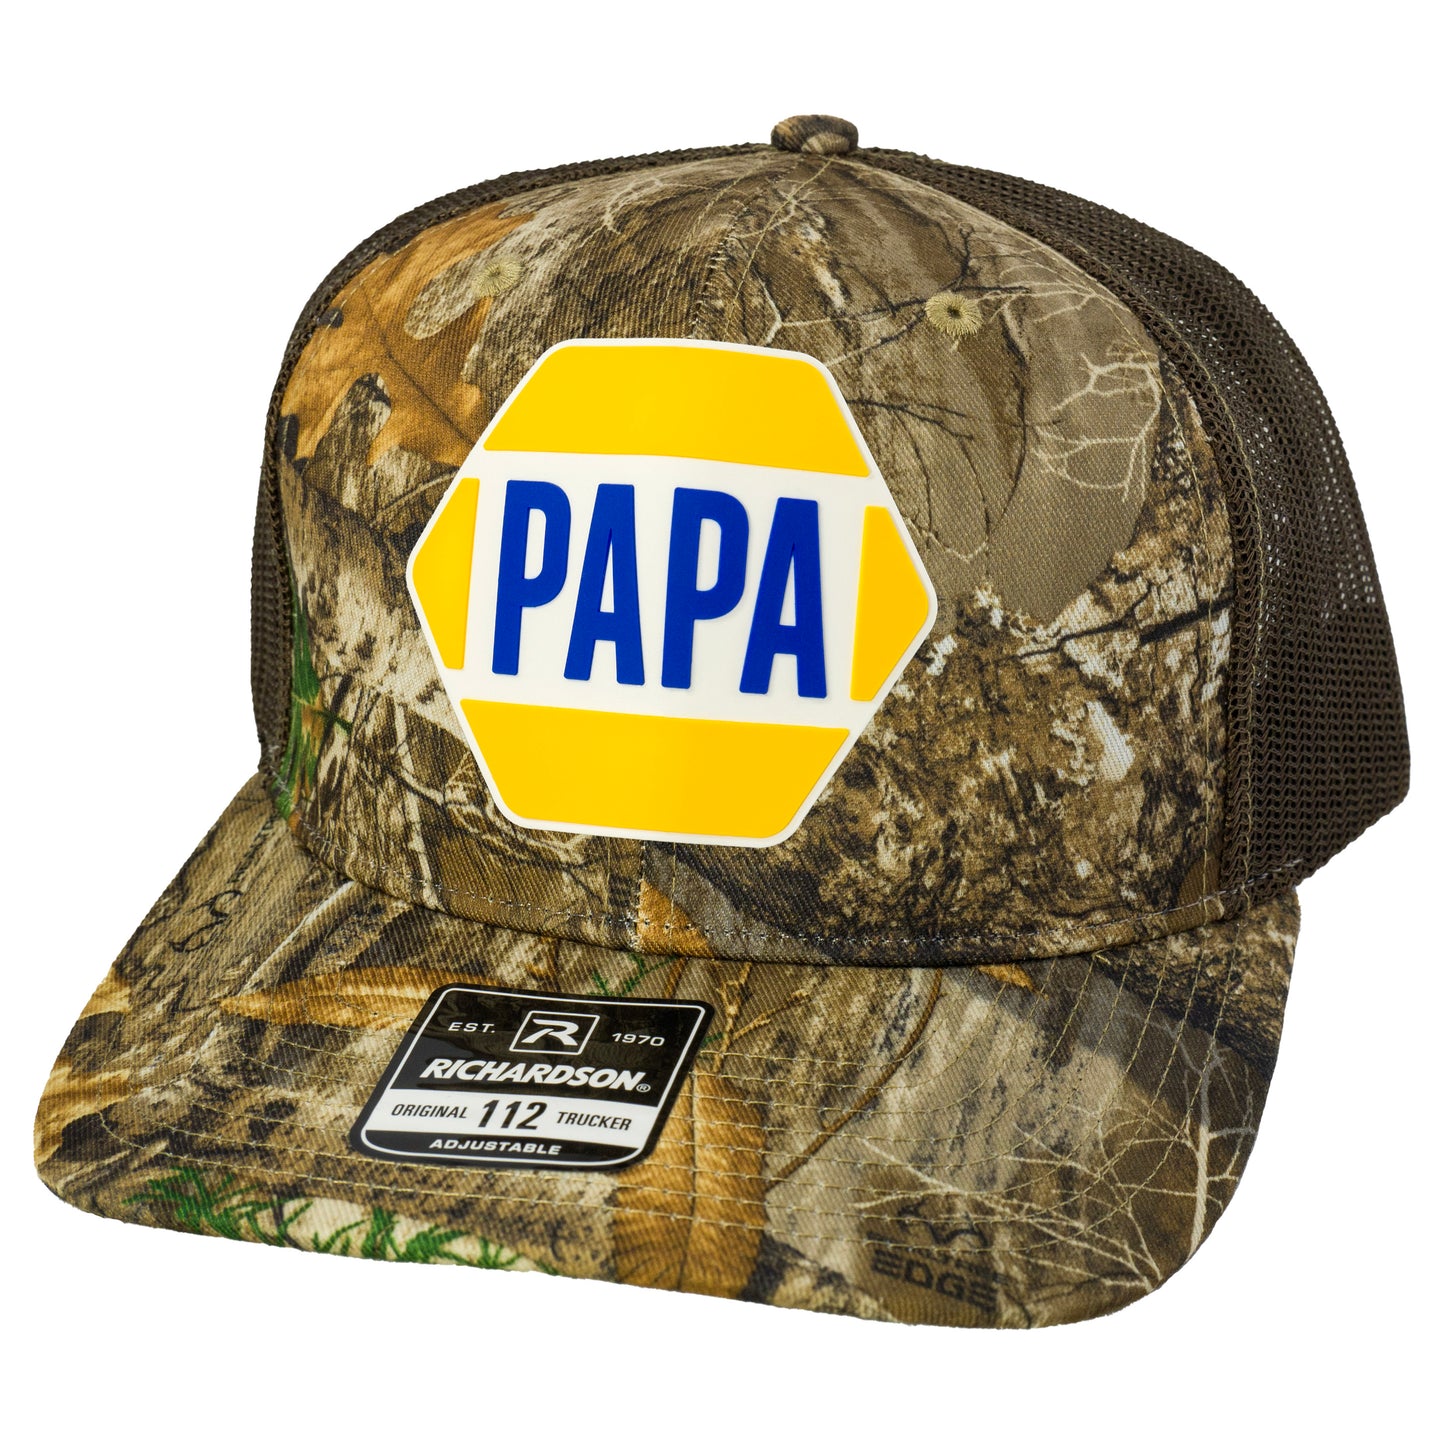 PAPA Know How 3D Patterned Snapback Trucker Hat- Realtree Edge/ Brown - Ten Gallon Hat Co.